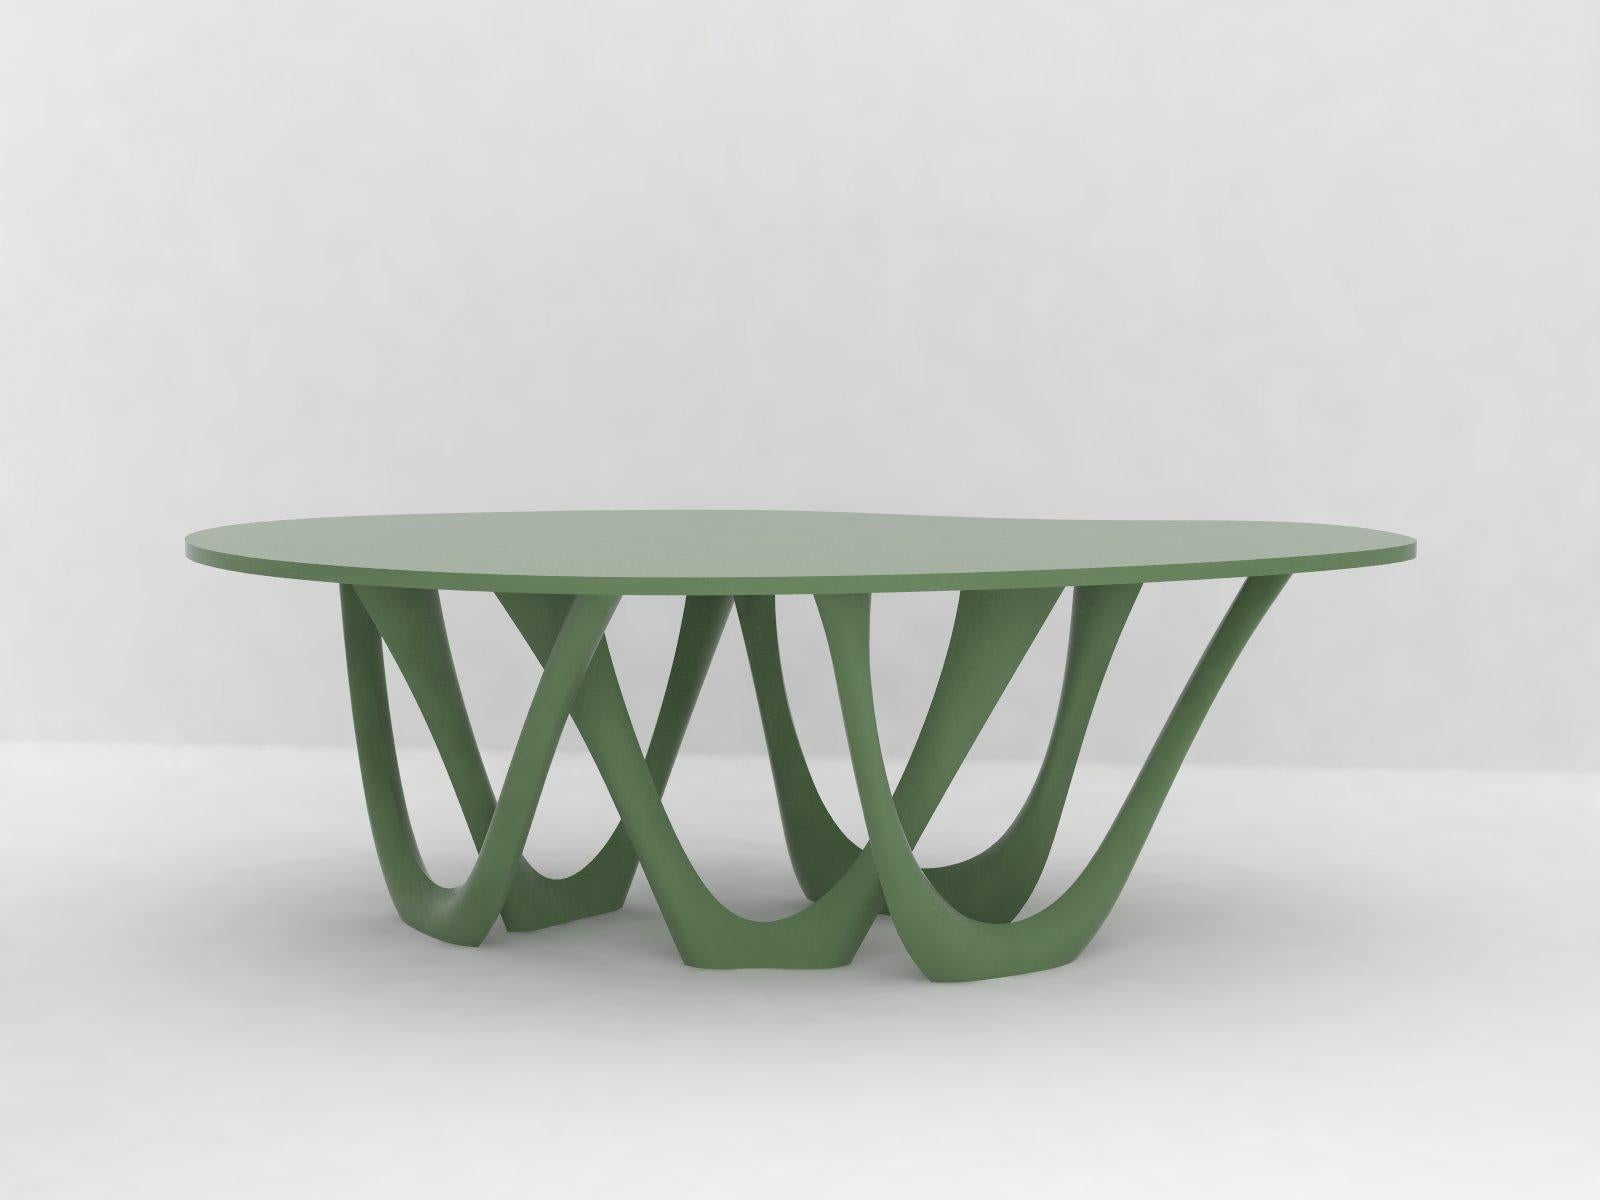 G-Table B+C in Powder-Coated Steel with Concrete Top by Zieta In Excellent Condition For Sale In New York, NY